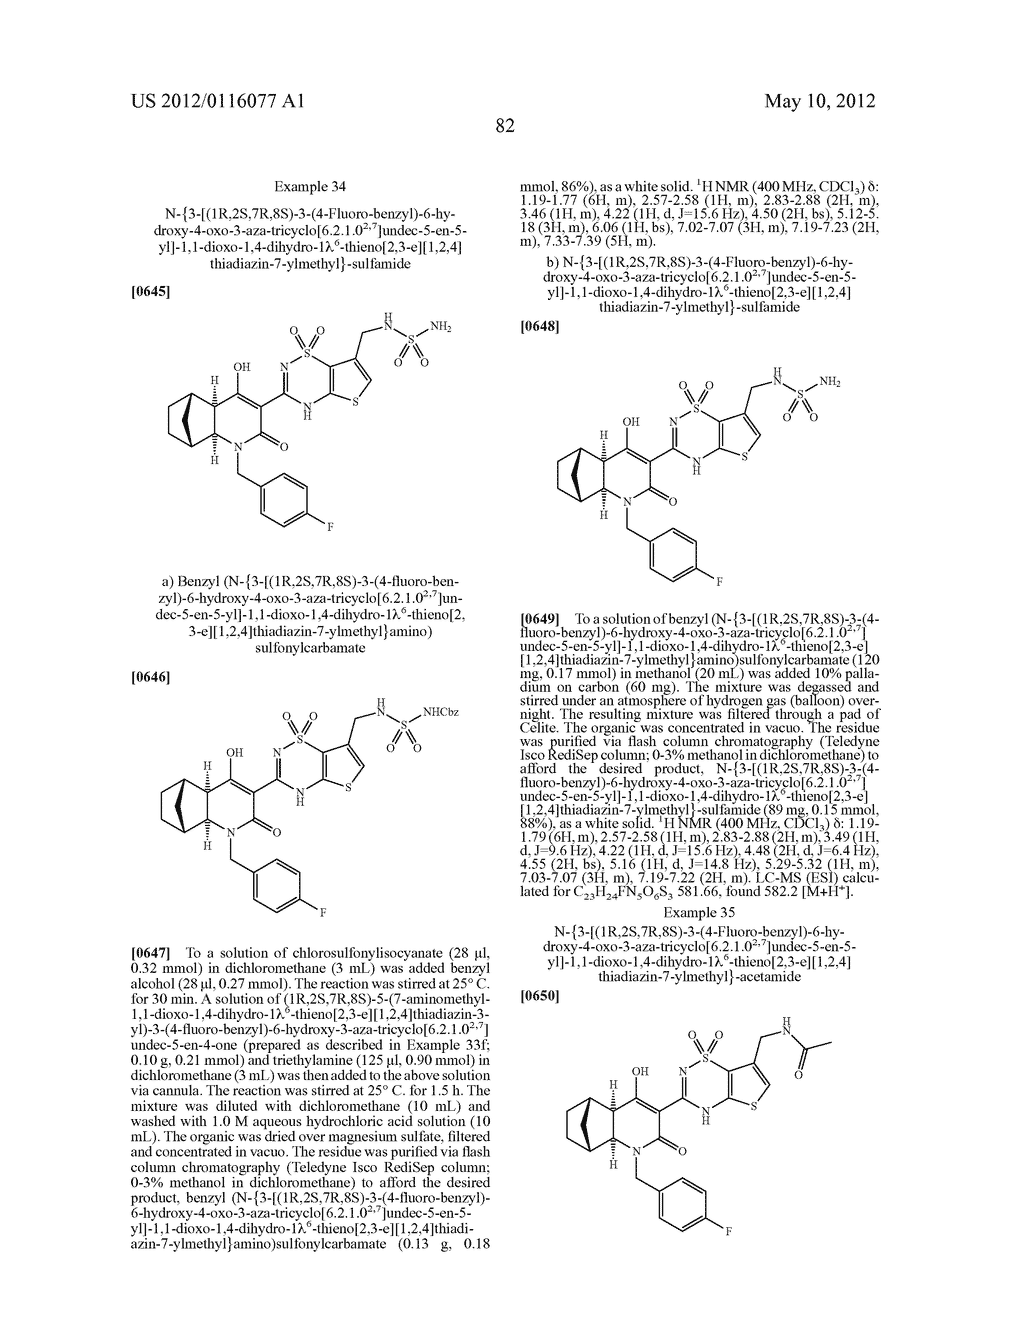 [1,2,4]THIADIAZIN-3-YL ACETIC ACID COMPOUND[[S]] AND METHODS OF MAKING THE     ACETIC ACID COMPOUND - diagram, schematic, and image 83